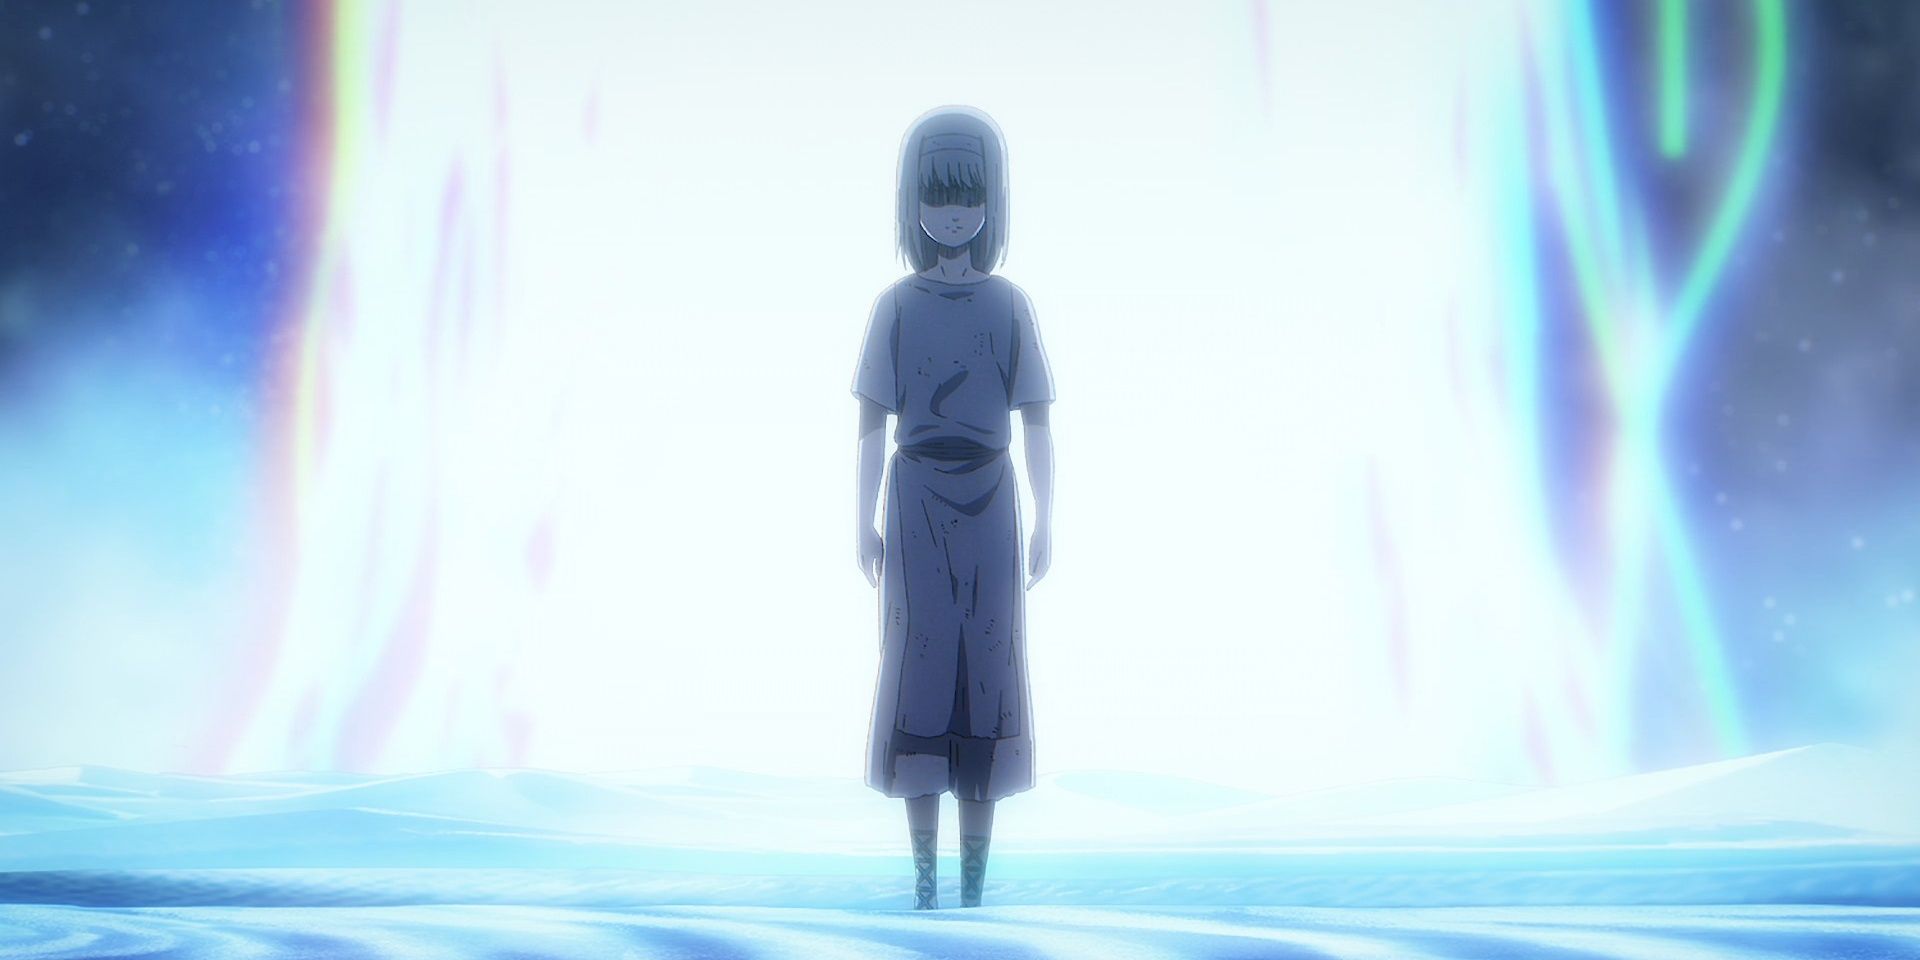 Ymir Standing In The Realm Of Paths